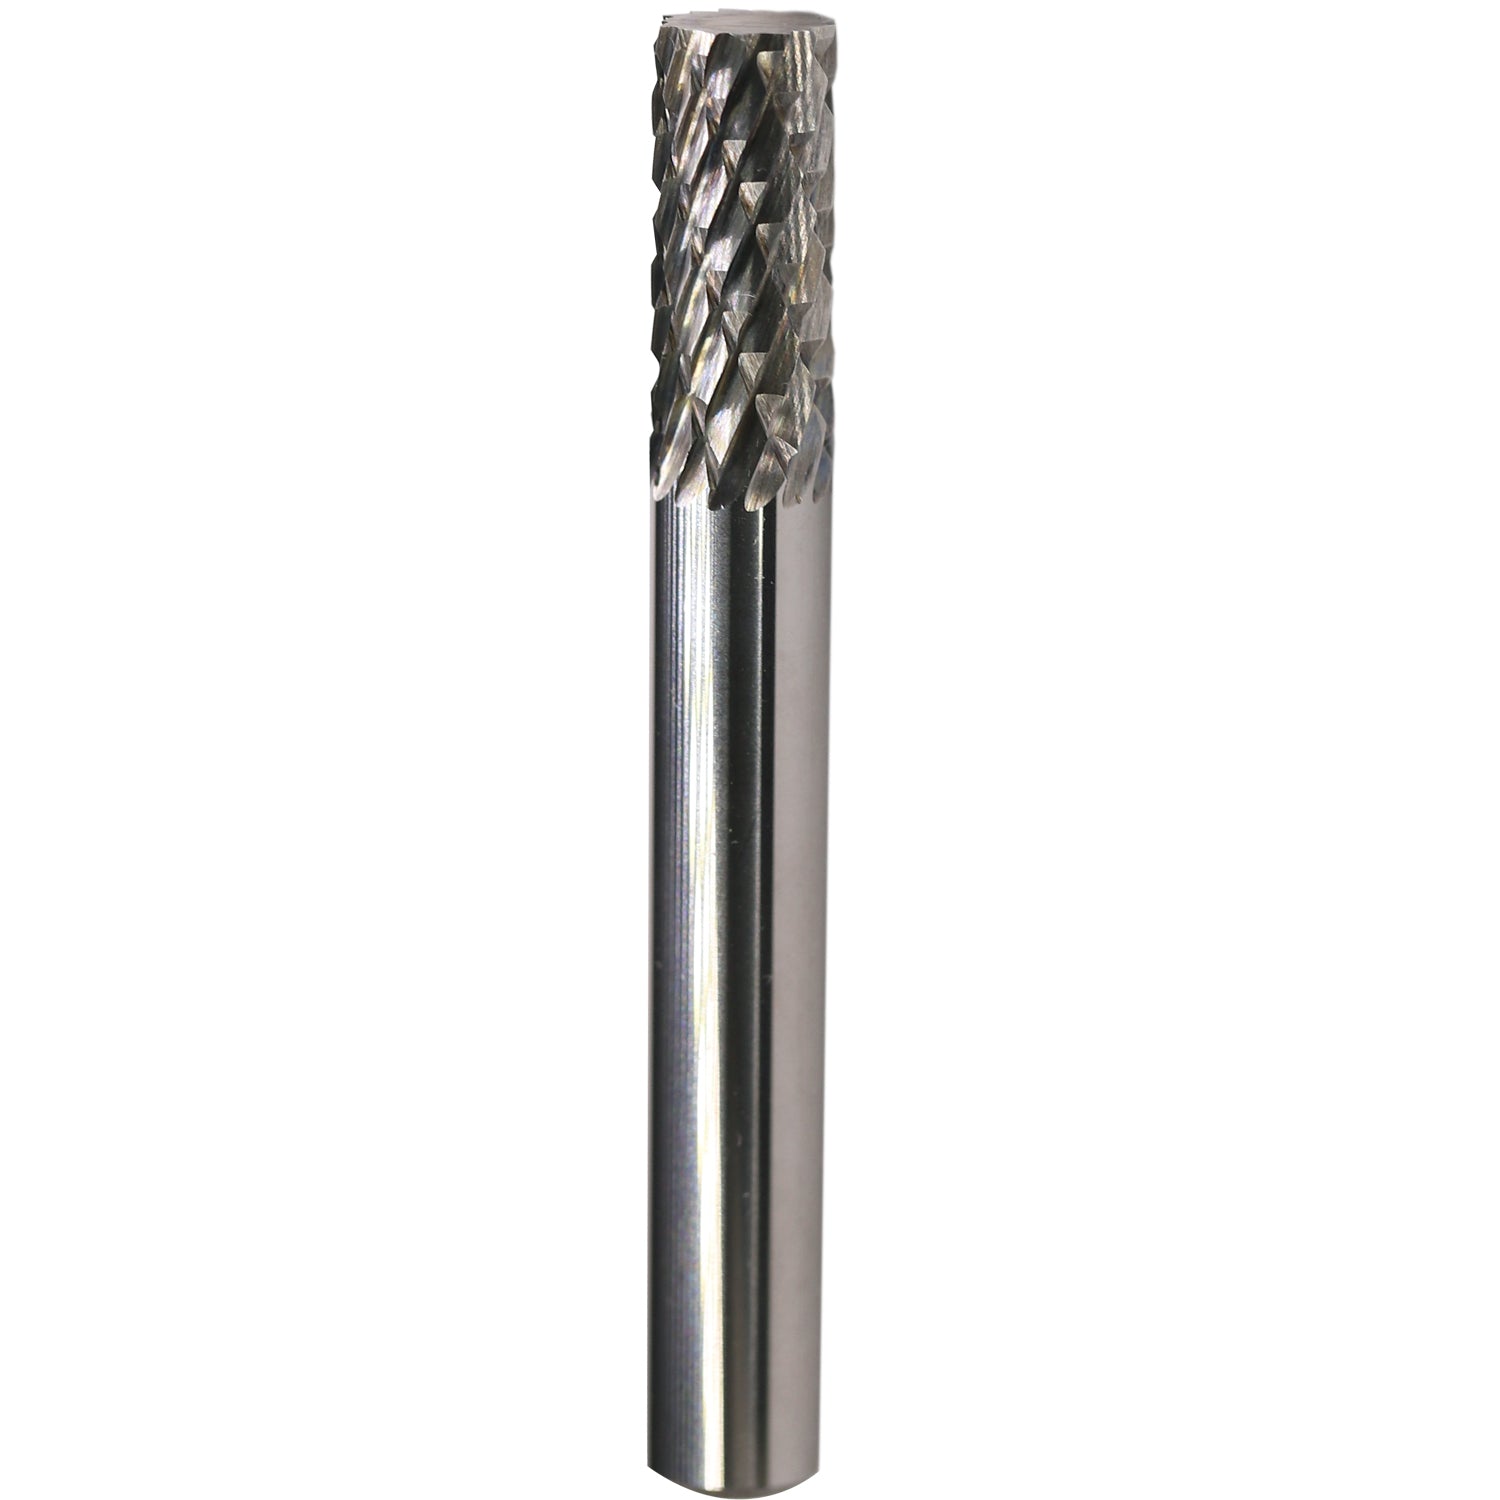 yeptooling SA-1 tungsten carbide burrs 6 mm shank diameter with double cut front side